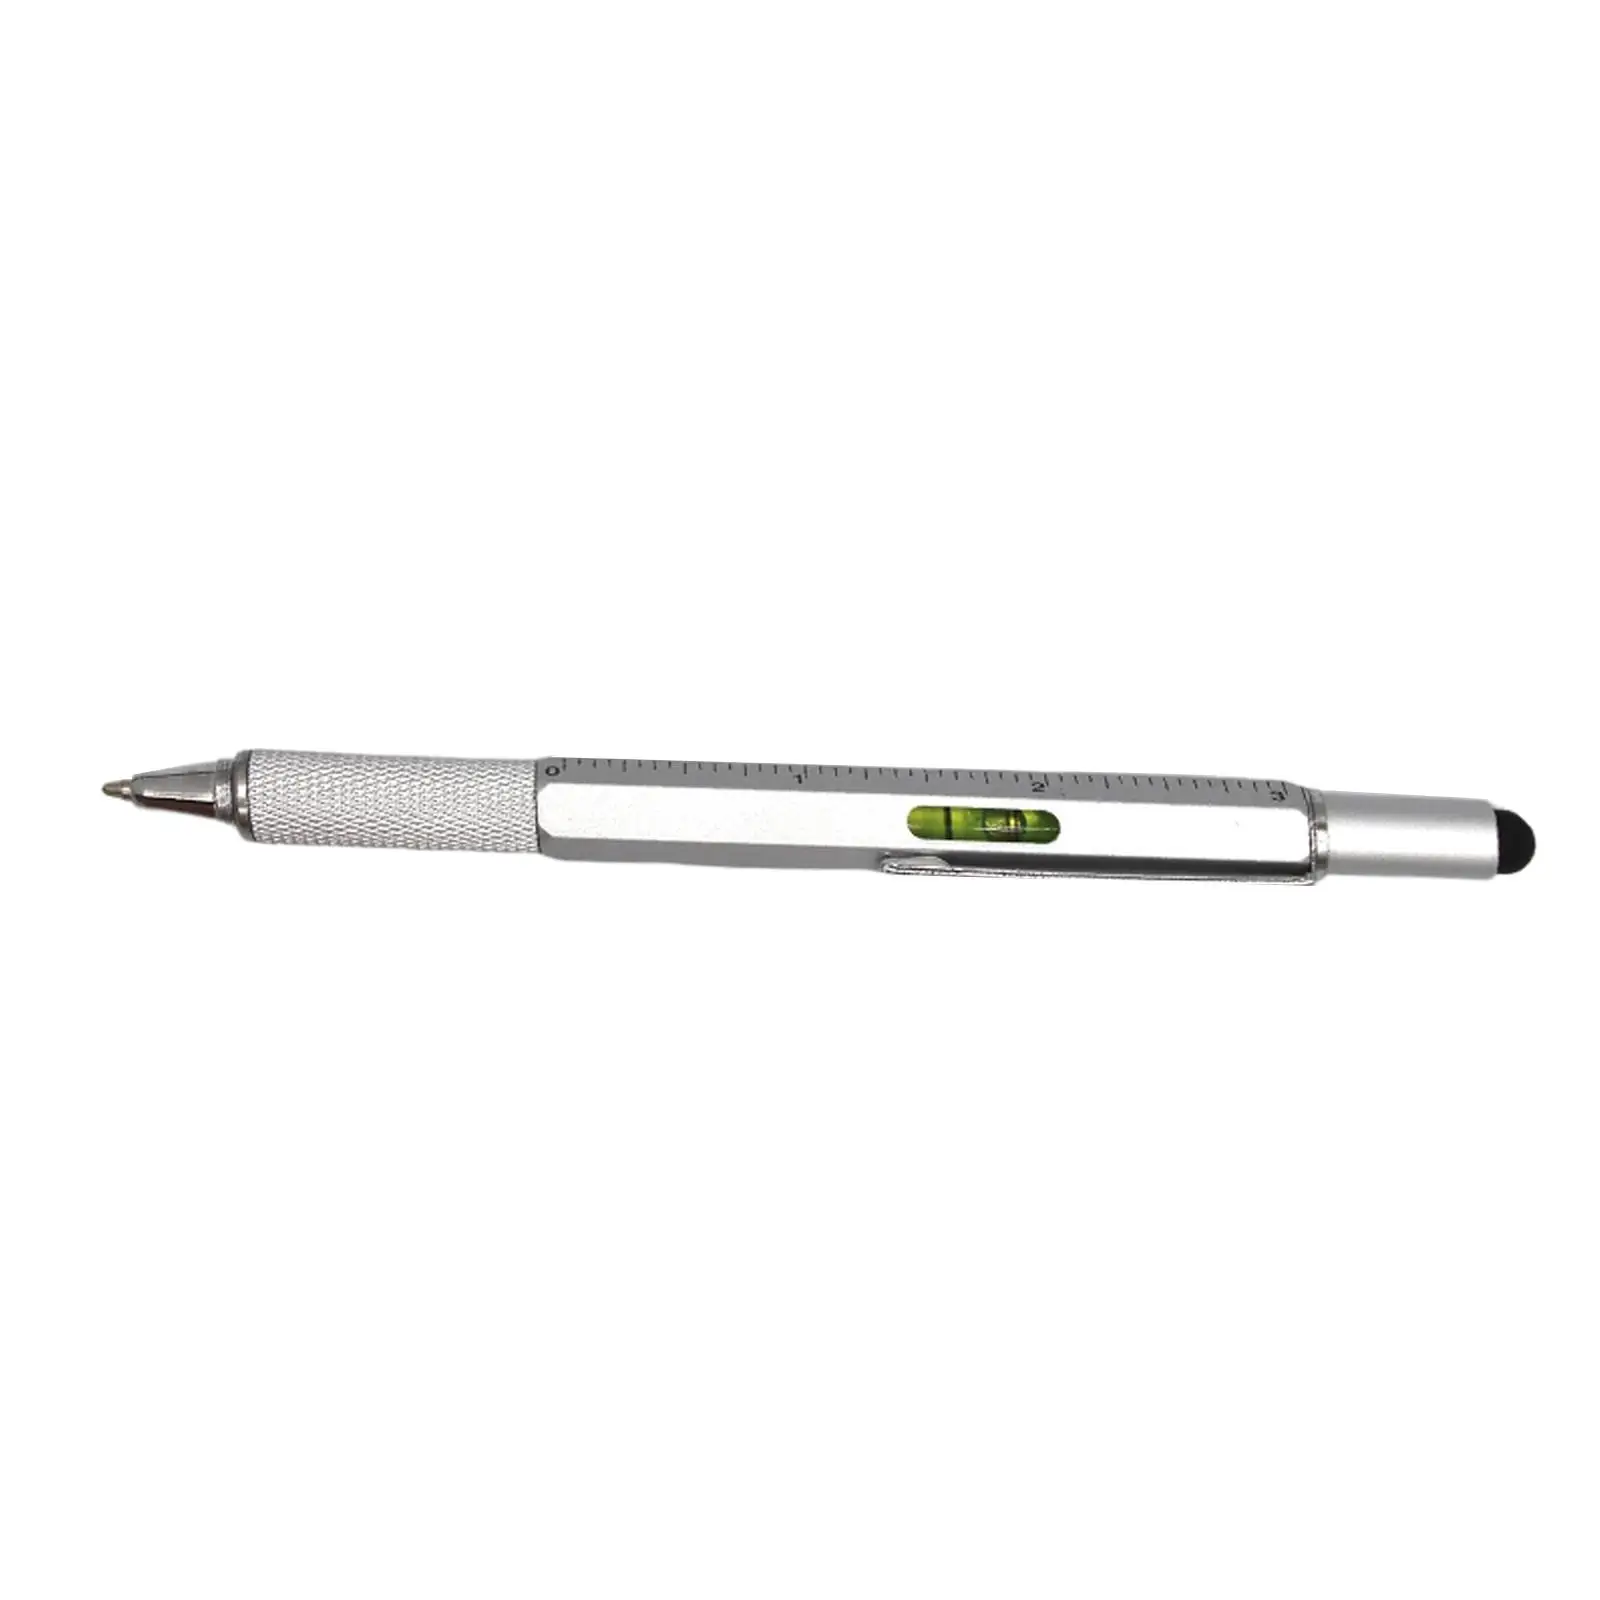 Touch Screen Pen Stylus Spirit Level for Tablets Point Reading Machine